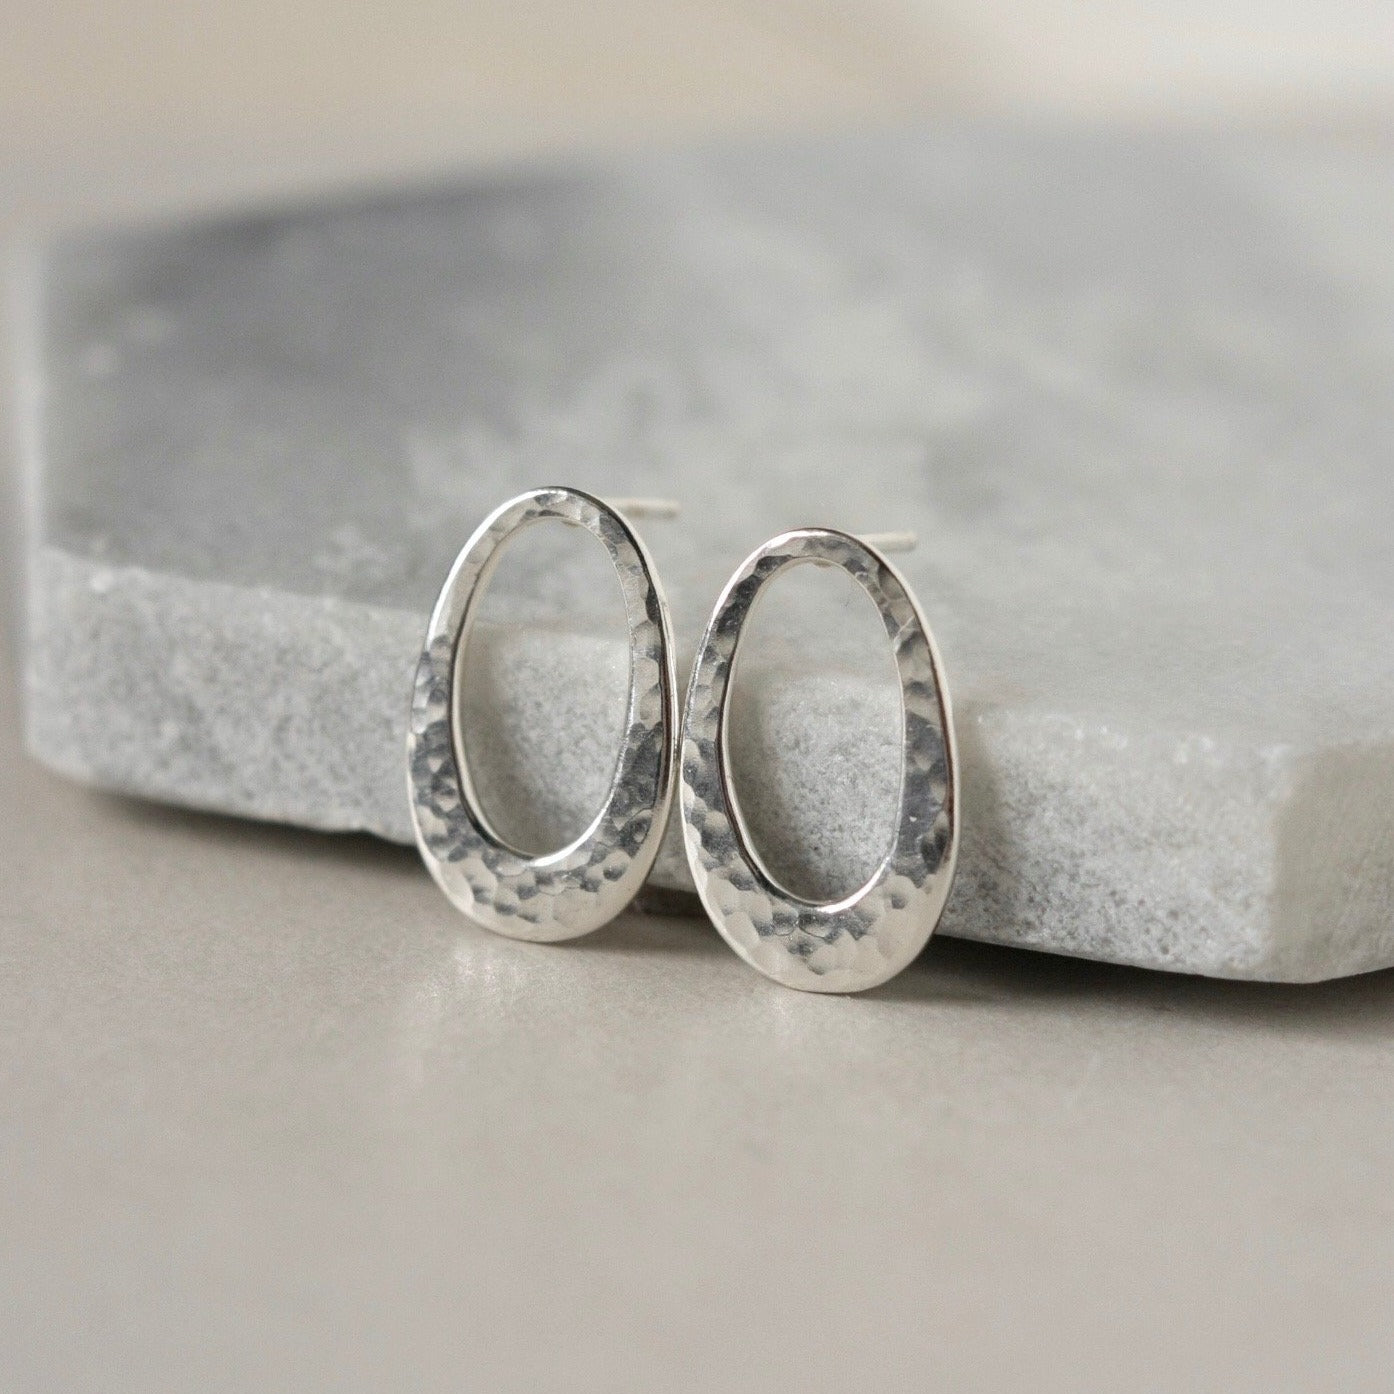 Hammered Sterling Silver Oval Stud Earrings